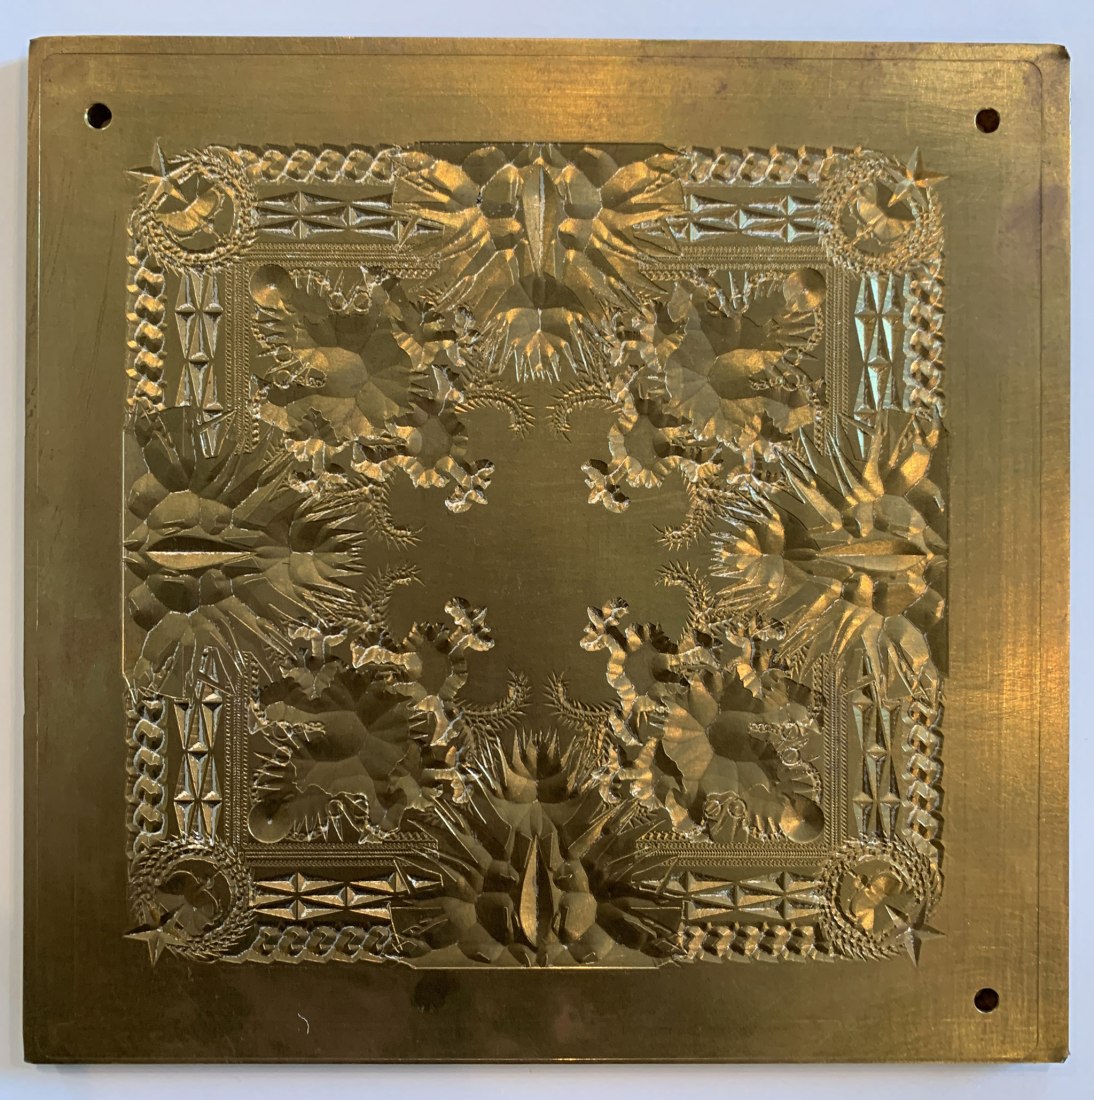 Virgil Abloh, Watch the Throne Album Press Plate, 2011. Courtesy of the artist.